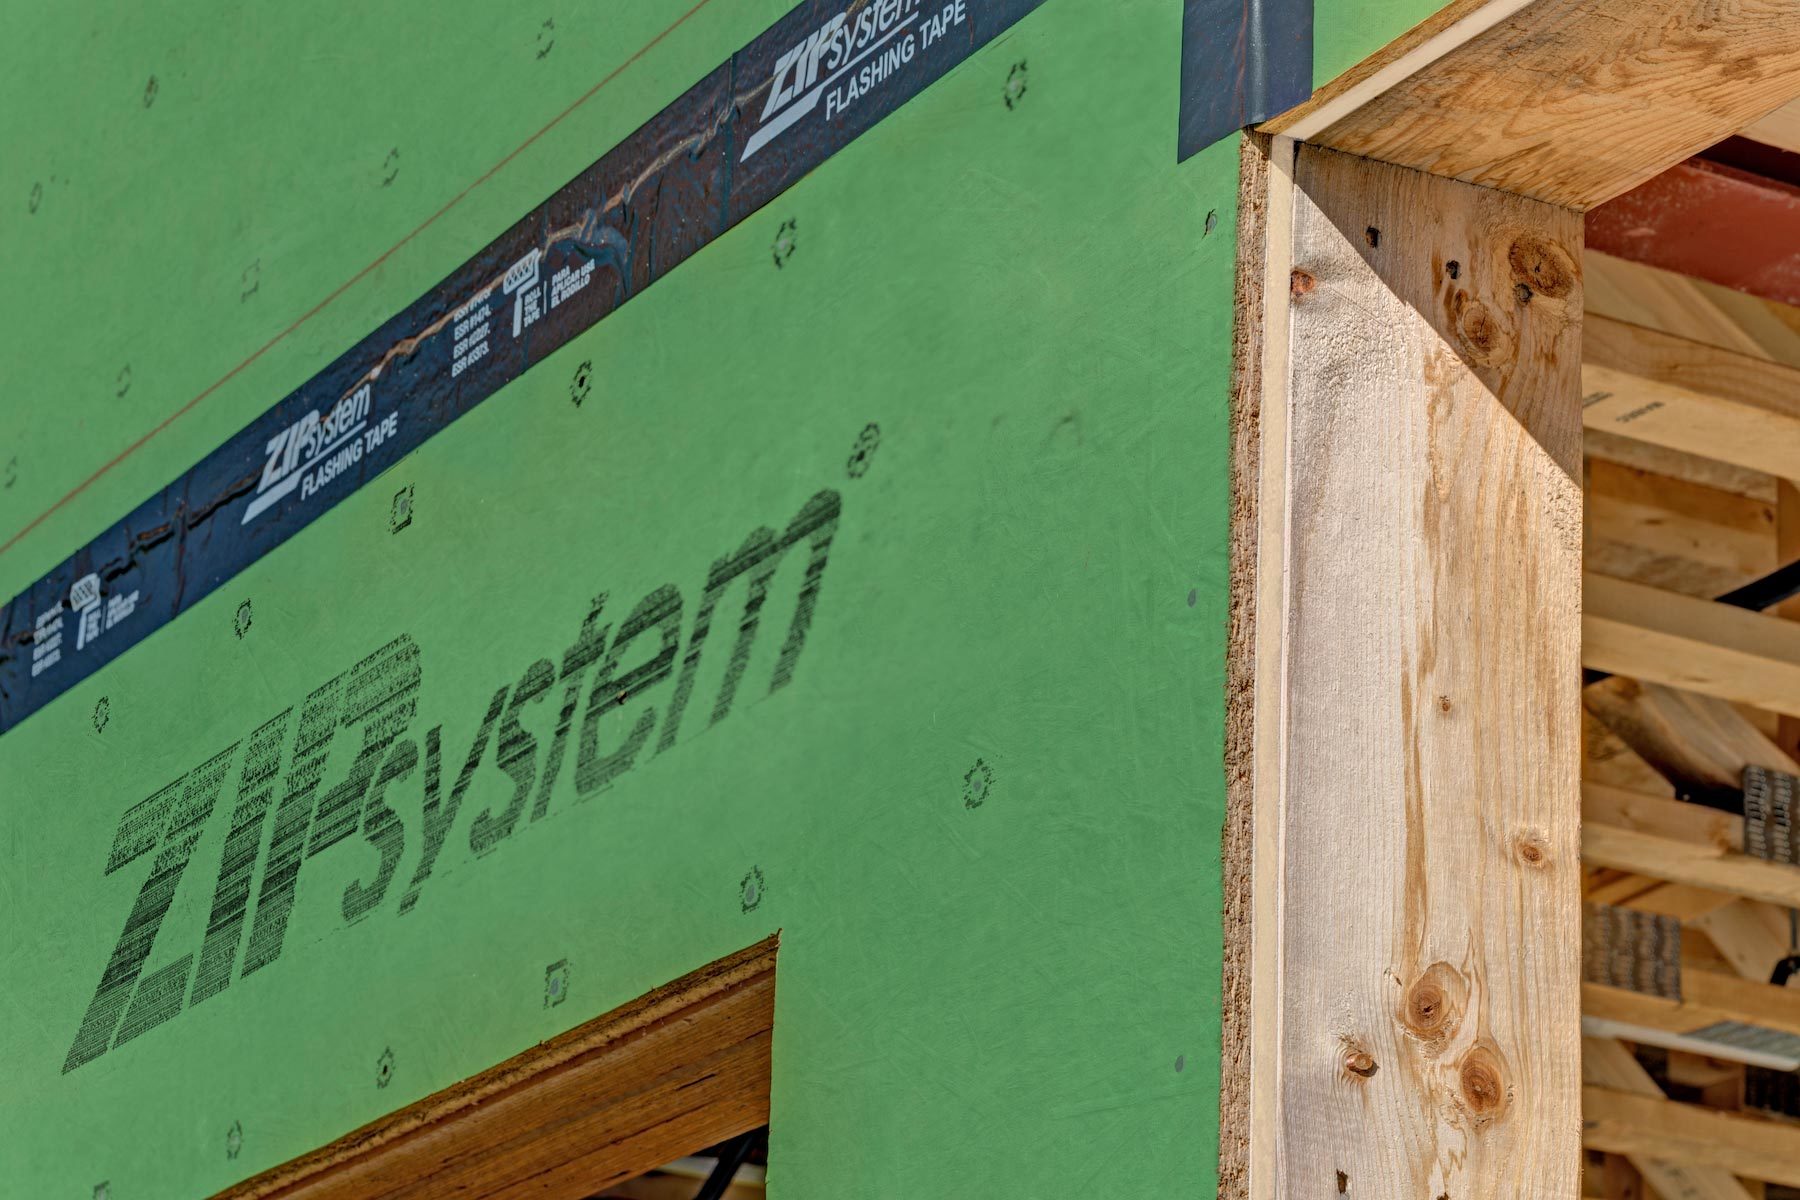 Moisture Control for Frame Walls  Continuous Insulation with Foam Sheathing